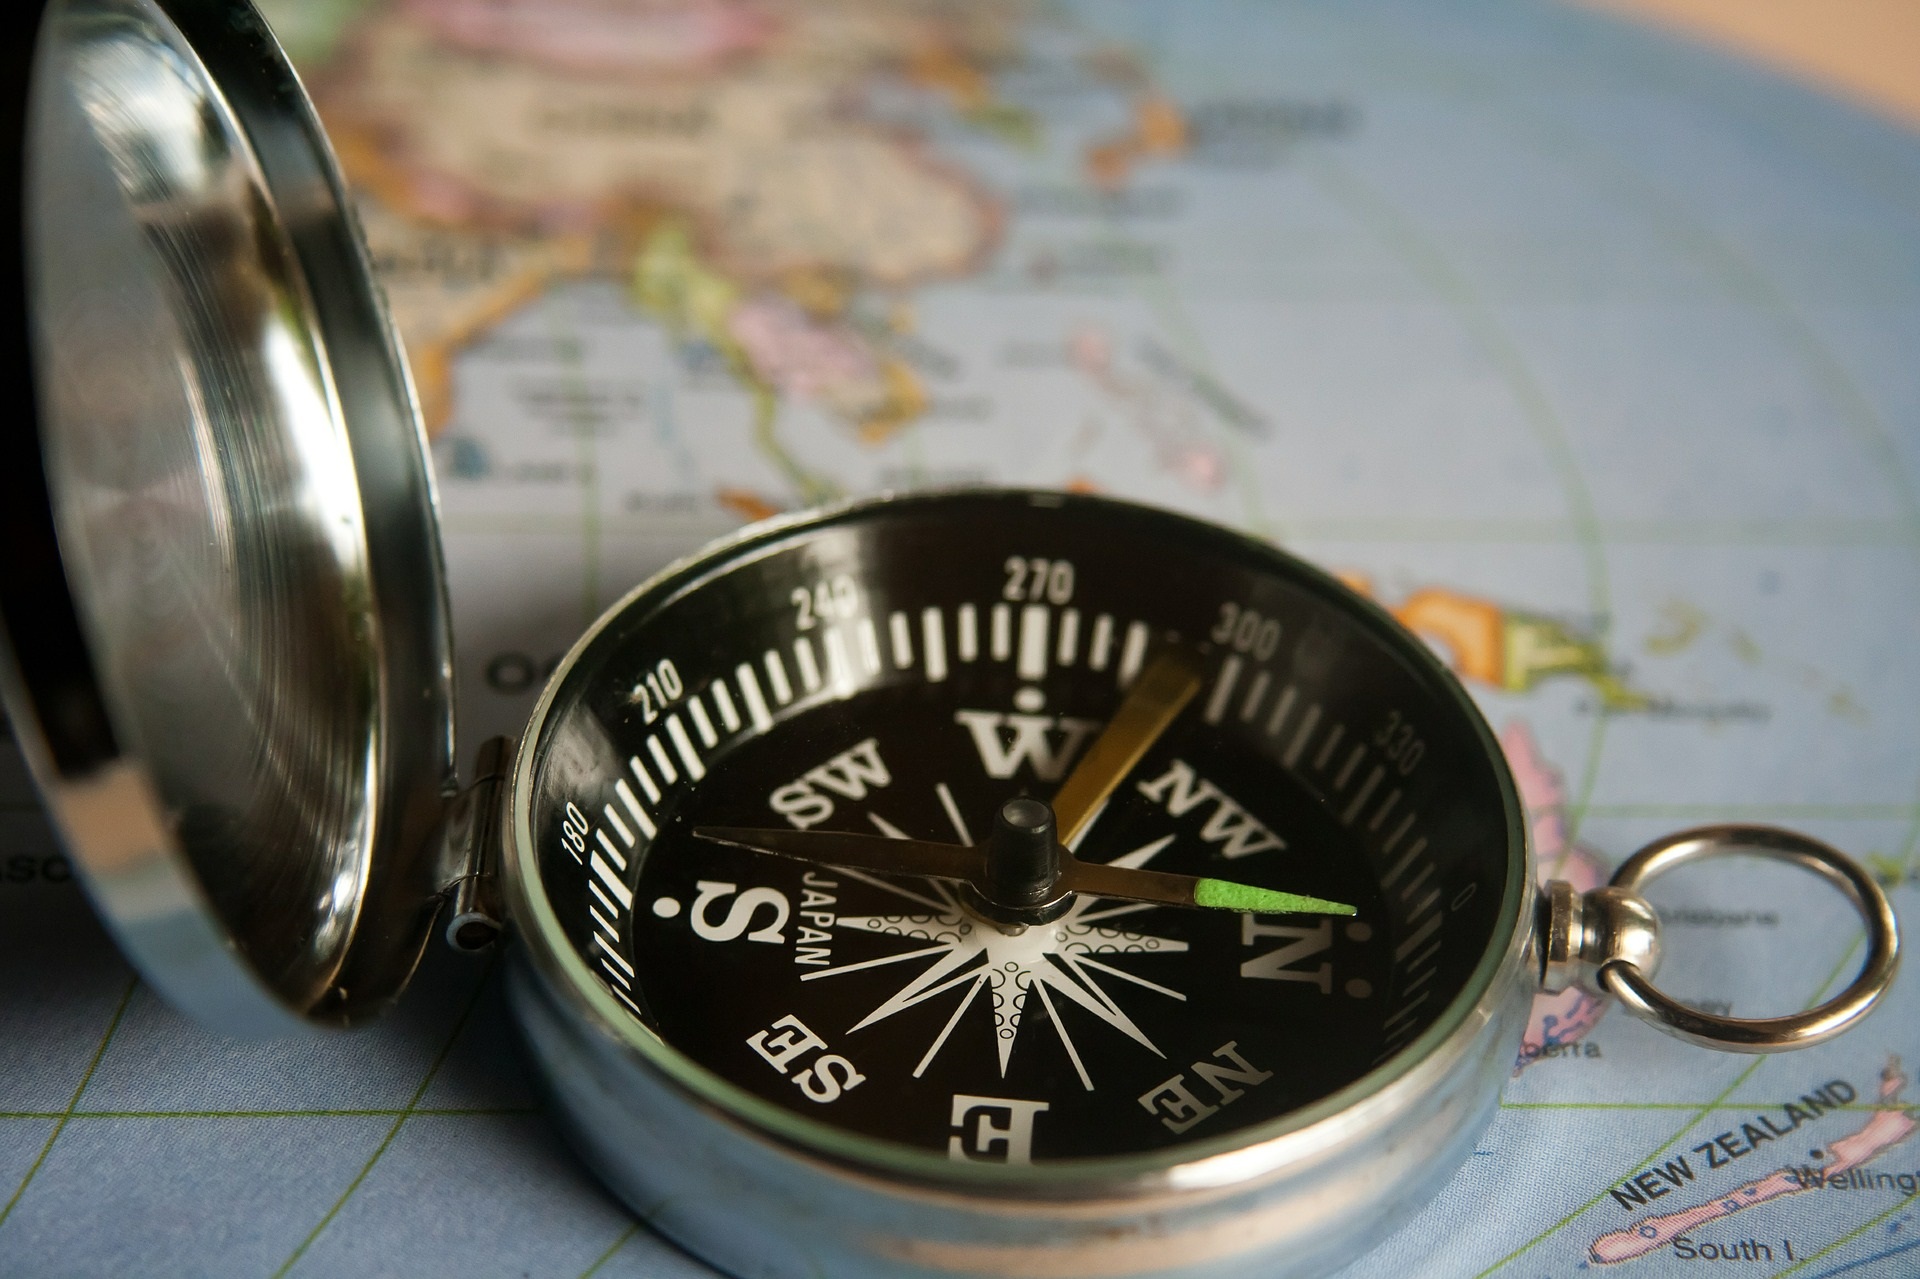 Engineering Innovations: The Compass